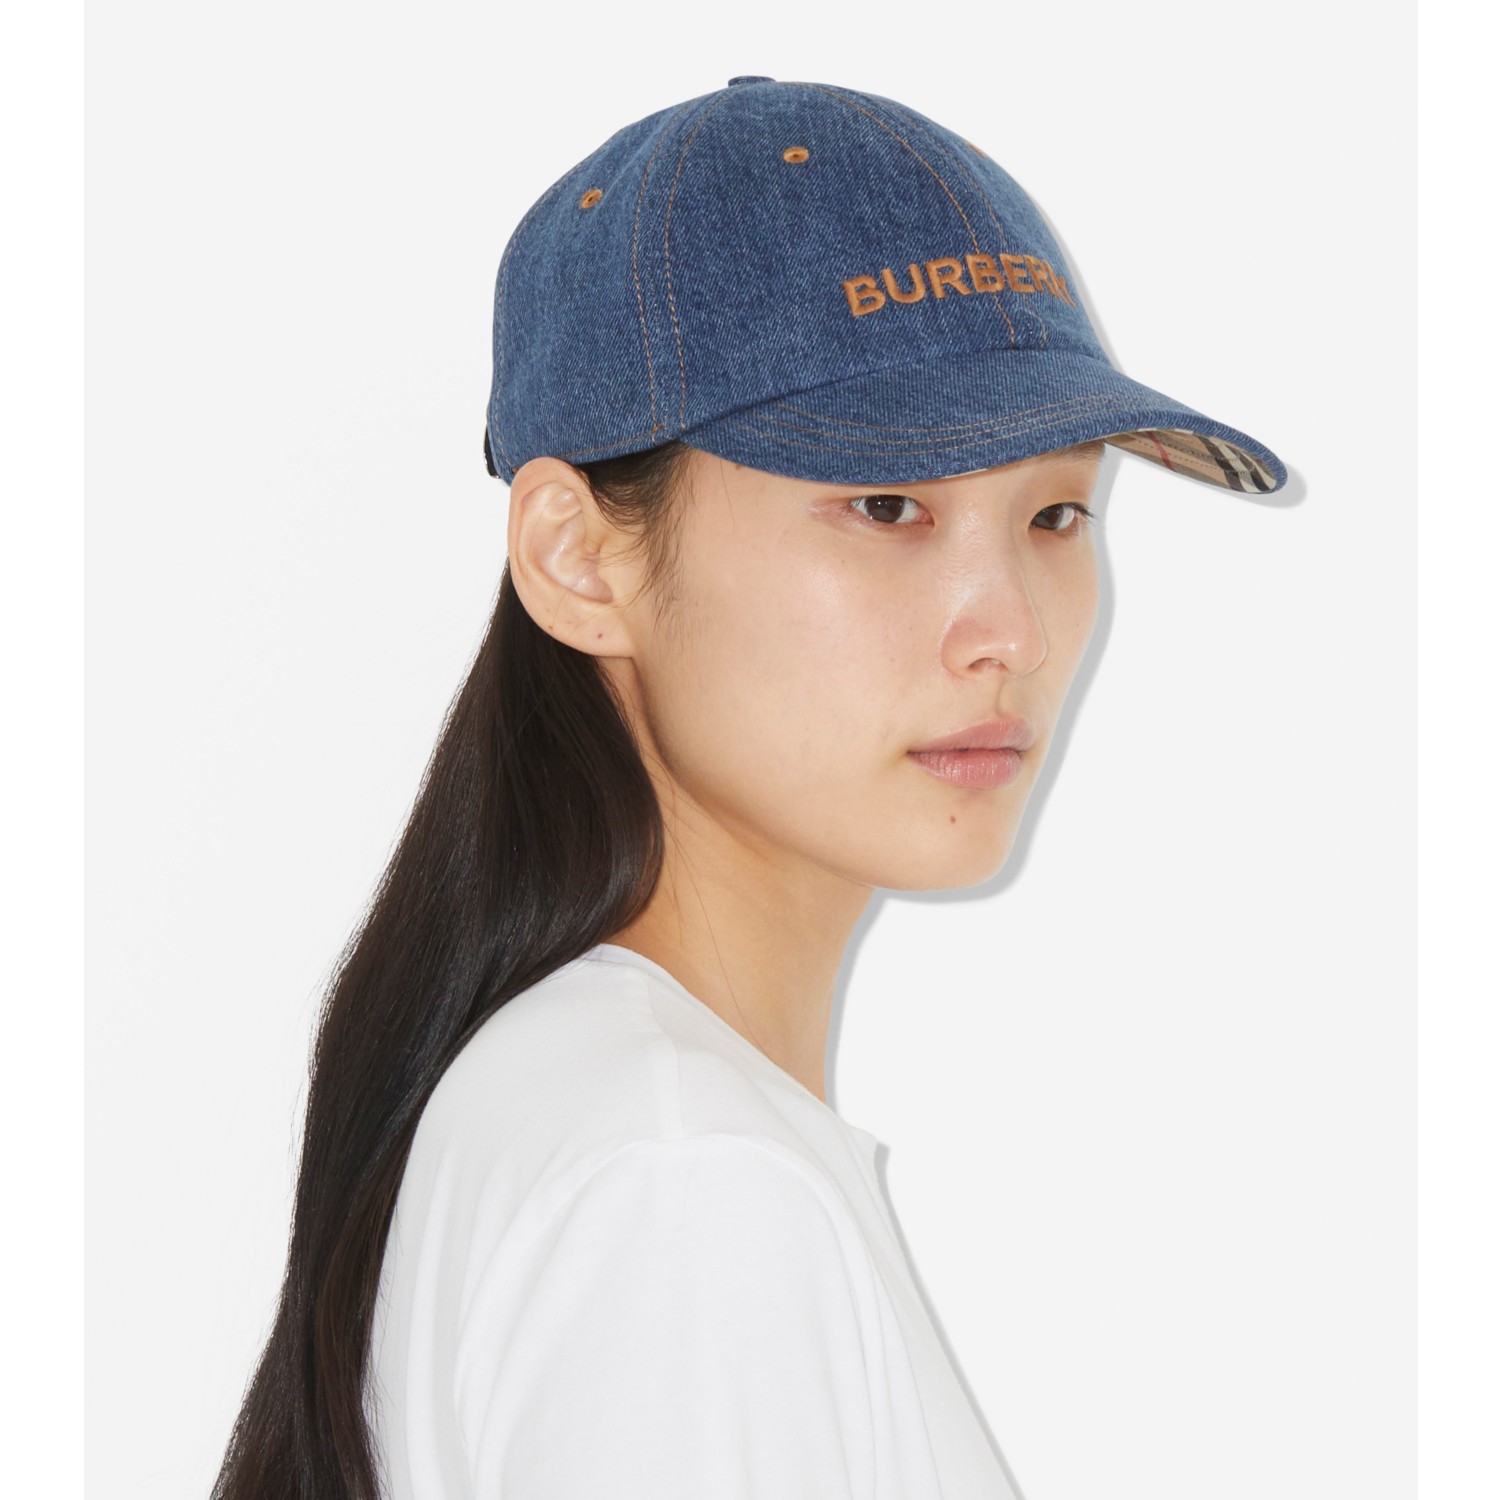 Embroidered Logo | Baseball Burberry® Cap Official Denim indigo Washed in